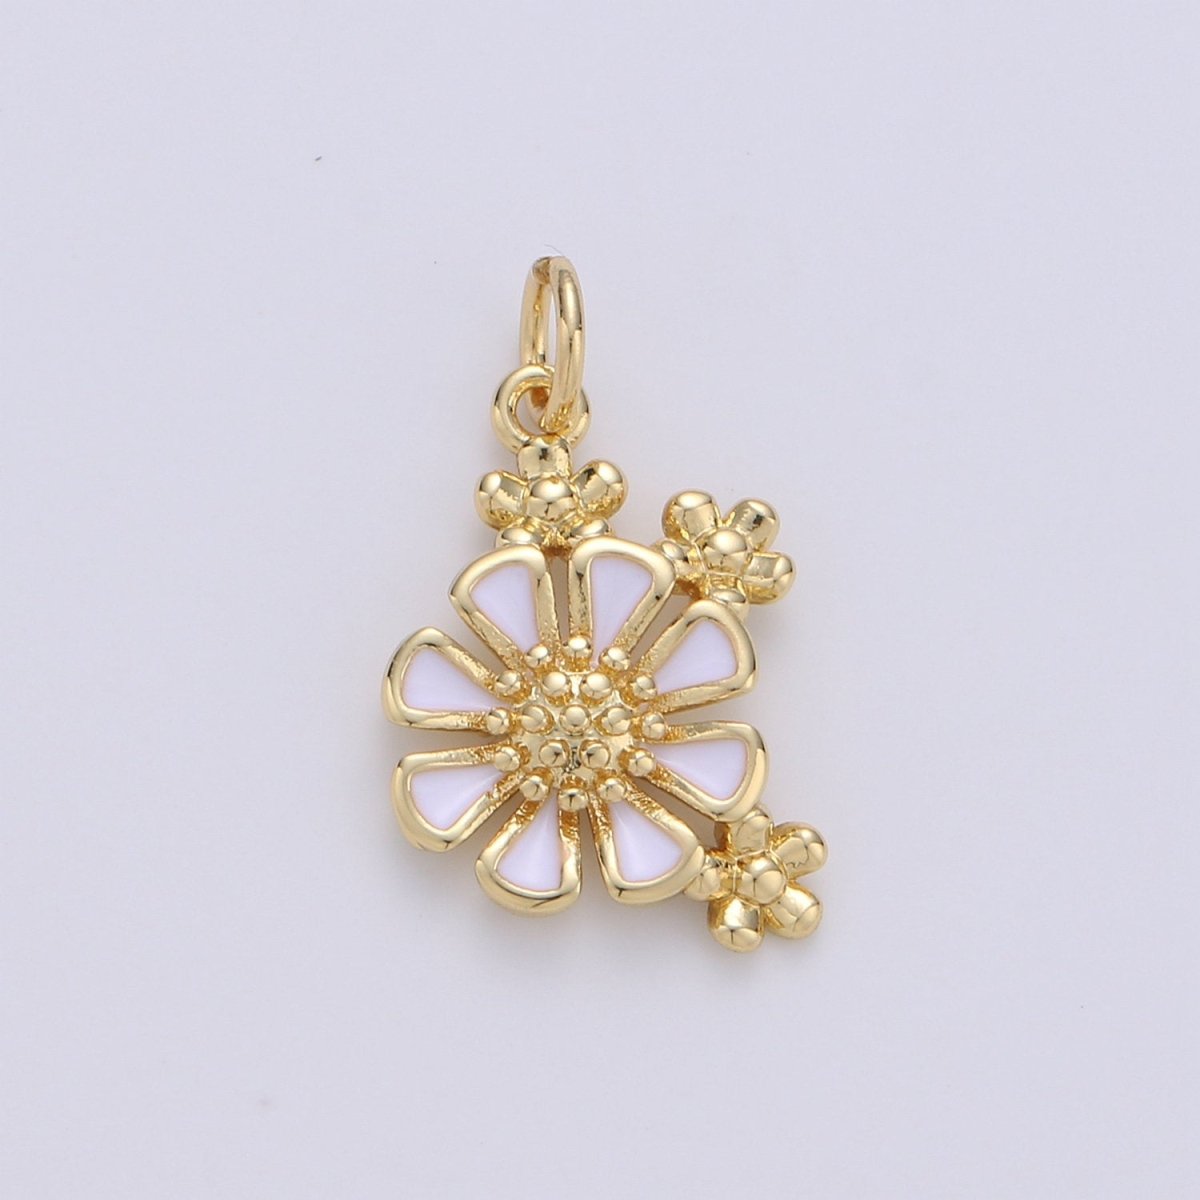 Dainty Daisy Charms Enamel Gold Plated for Bracelet Necklace Earring Component Summer Jewelry Flower Floral Pendant D-264 D-265 - DLUXCA